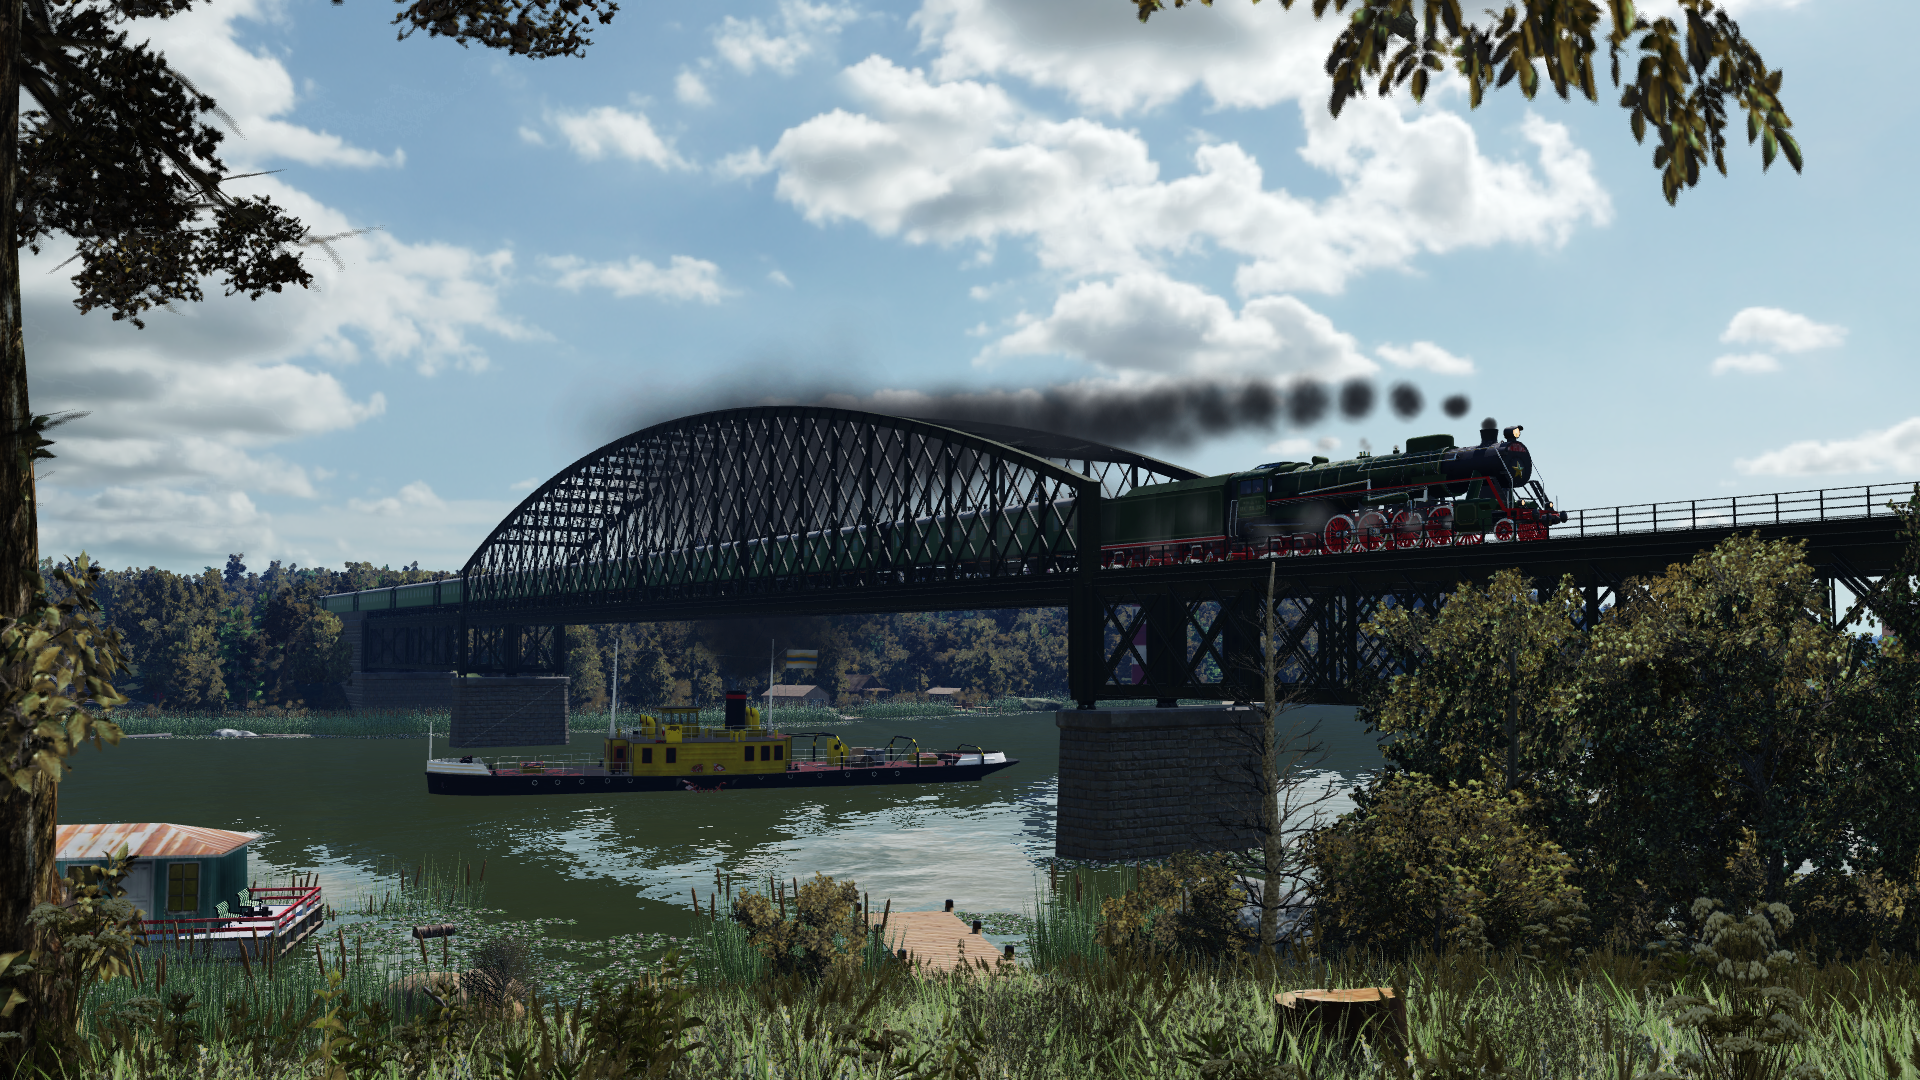 [TpF1] Express train crossing the river